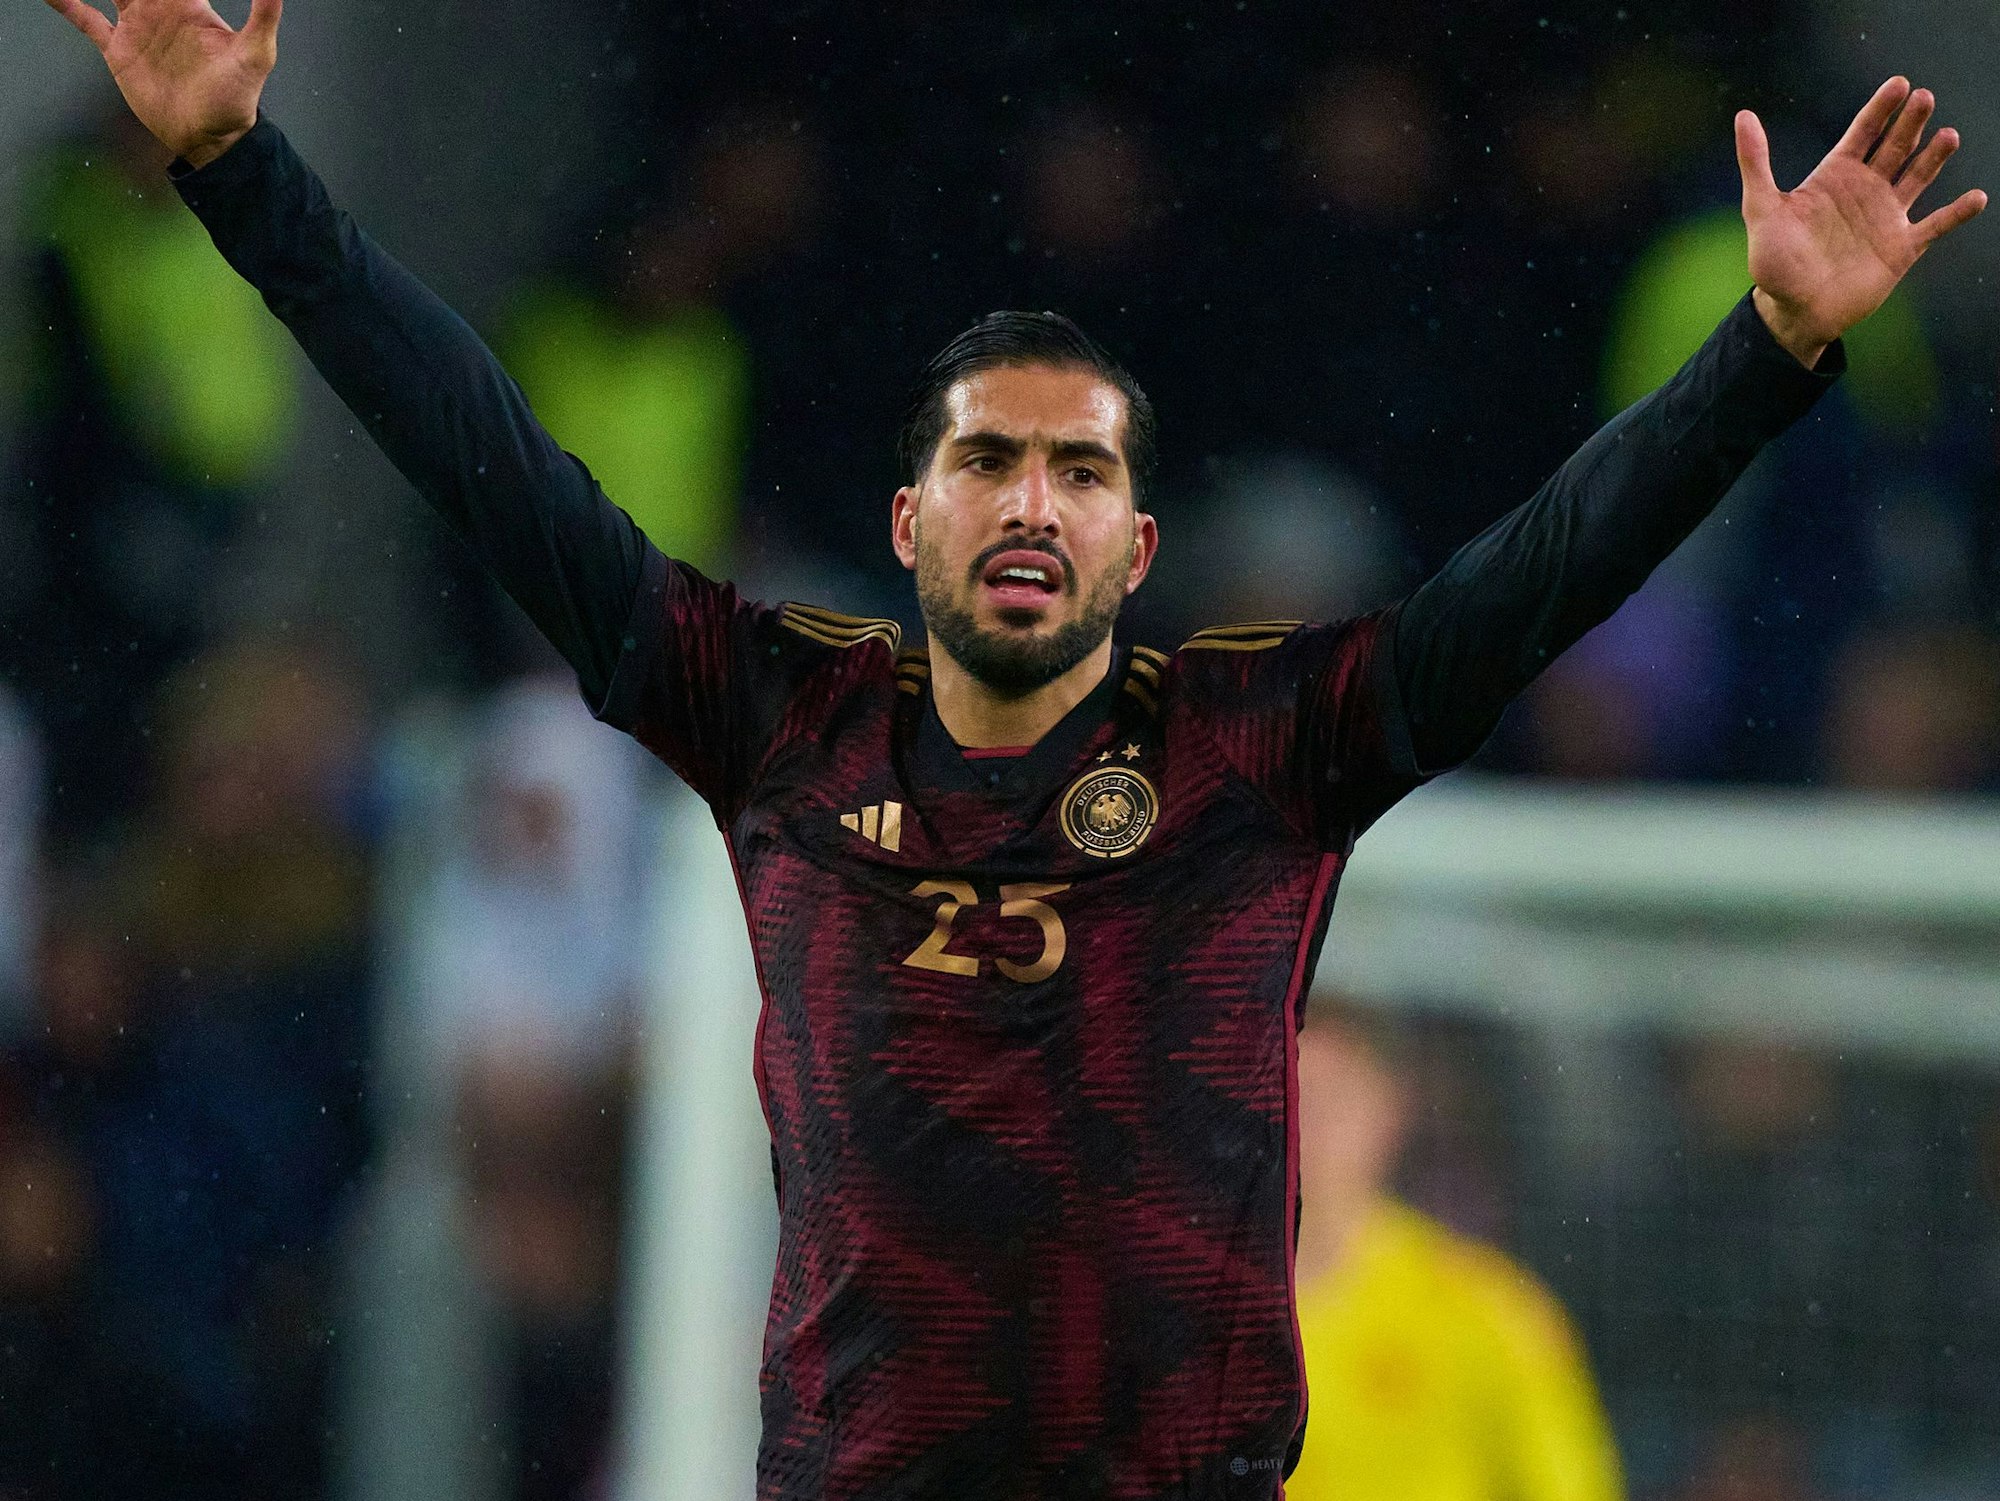 Emre Can, DFB 23 in the friendly match GERMANY - BELGIUM 2-3 Preparation for European Championships 2024 in Germany ,Season 2022/2023, on Mar 28, 2023 in Cologne, Köln, Germany.